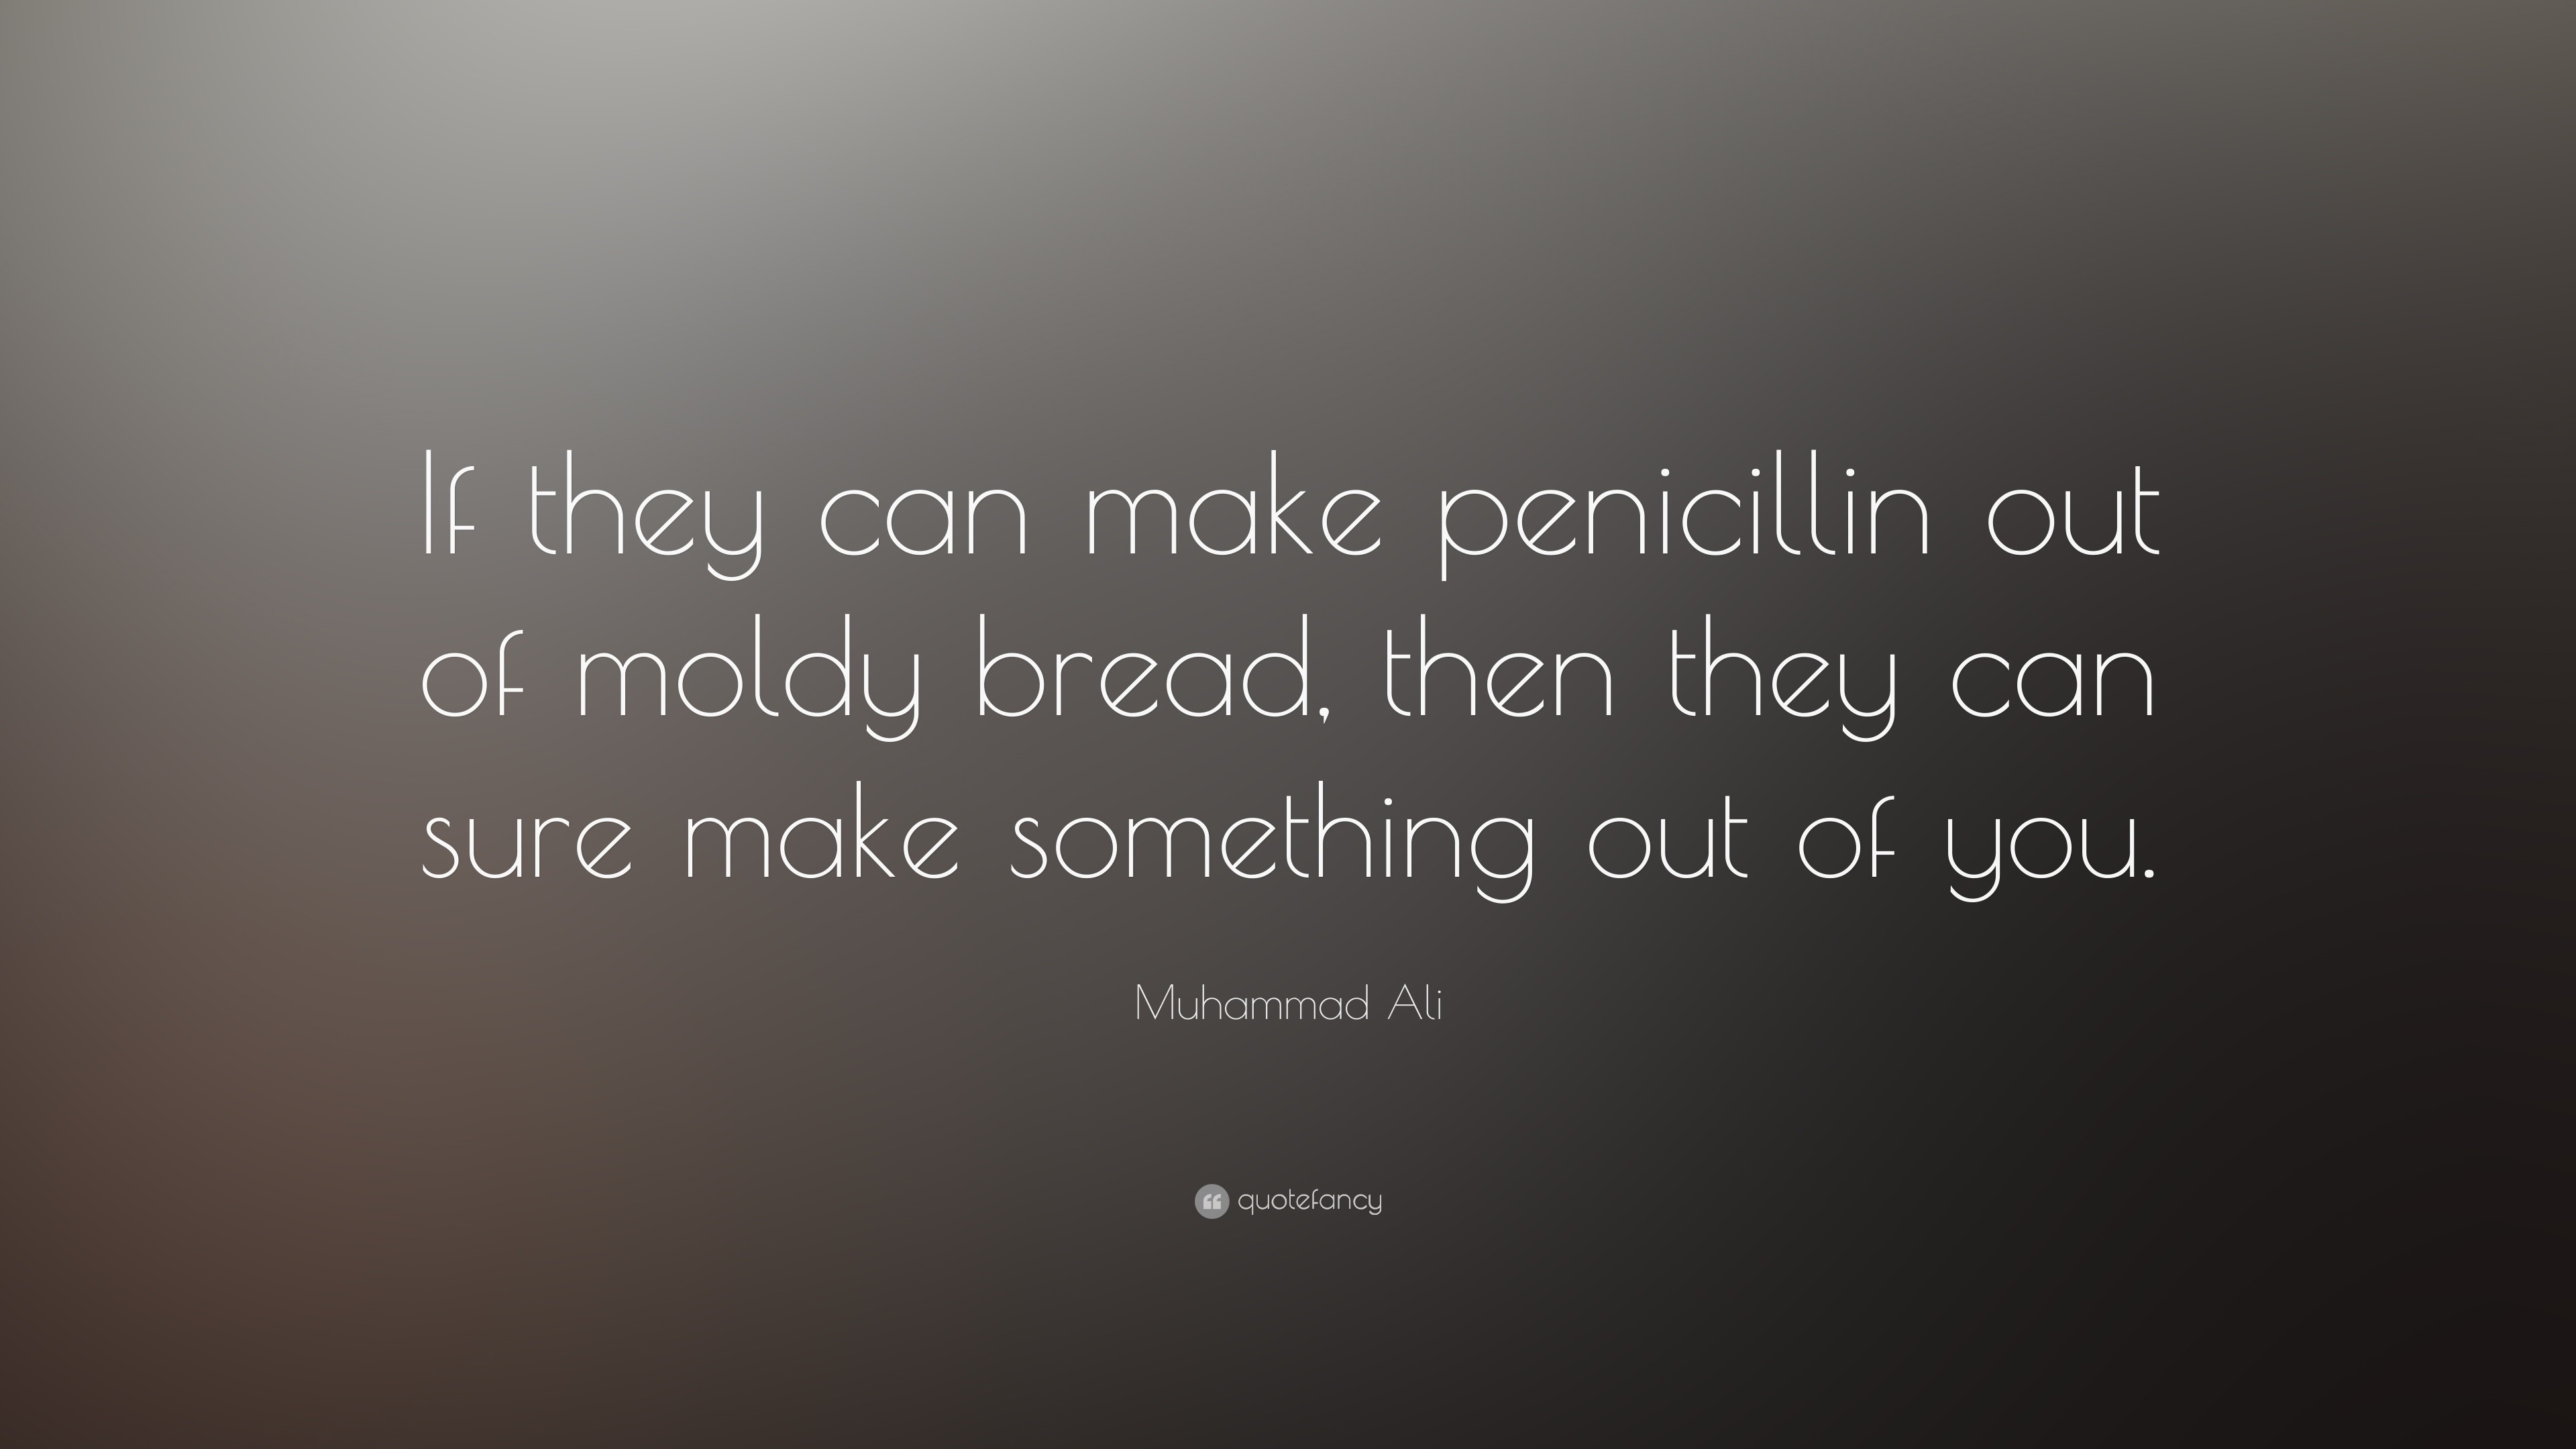 3840x2160 Muhammad Ali Quote: “If they can make penicillin out of moldy bread, then